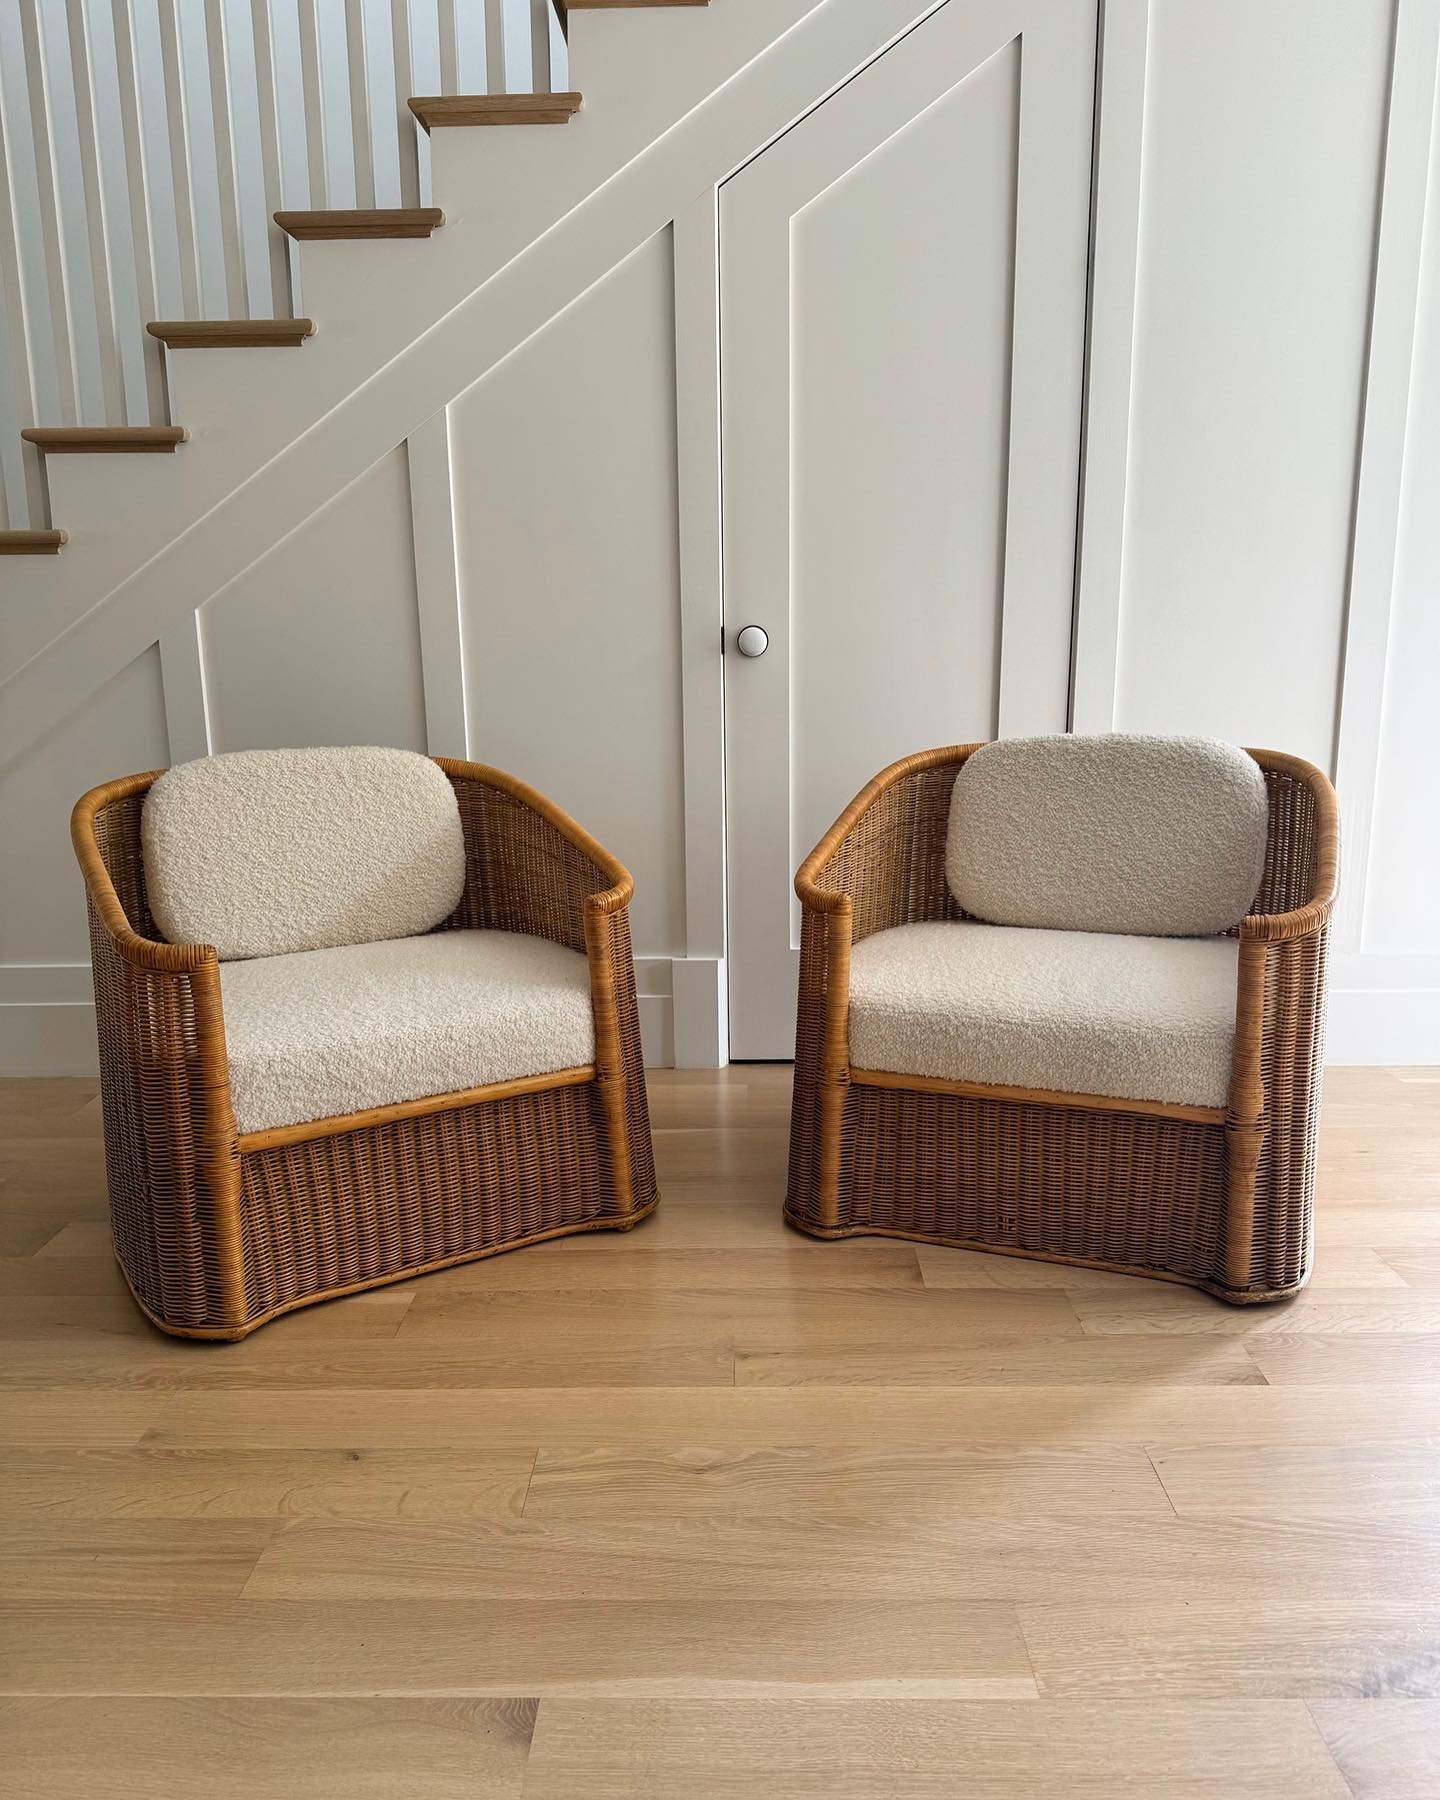 Now available on @marketbyanjamichals. The set of Vintage 1940&rsquo;s French Wicker Chairs, upholstered in a soft white shearling wool and accompanying pillow.